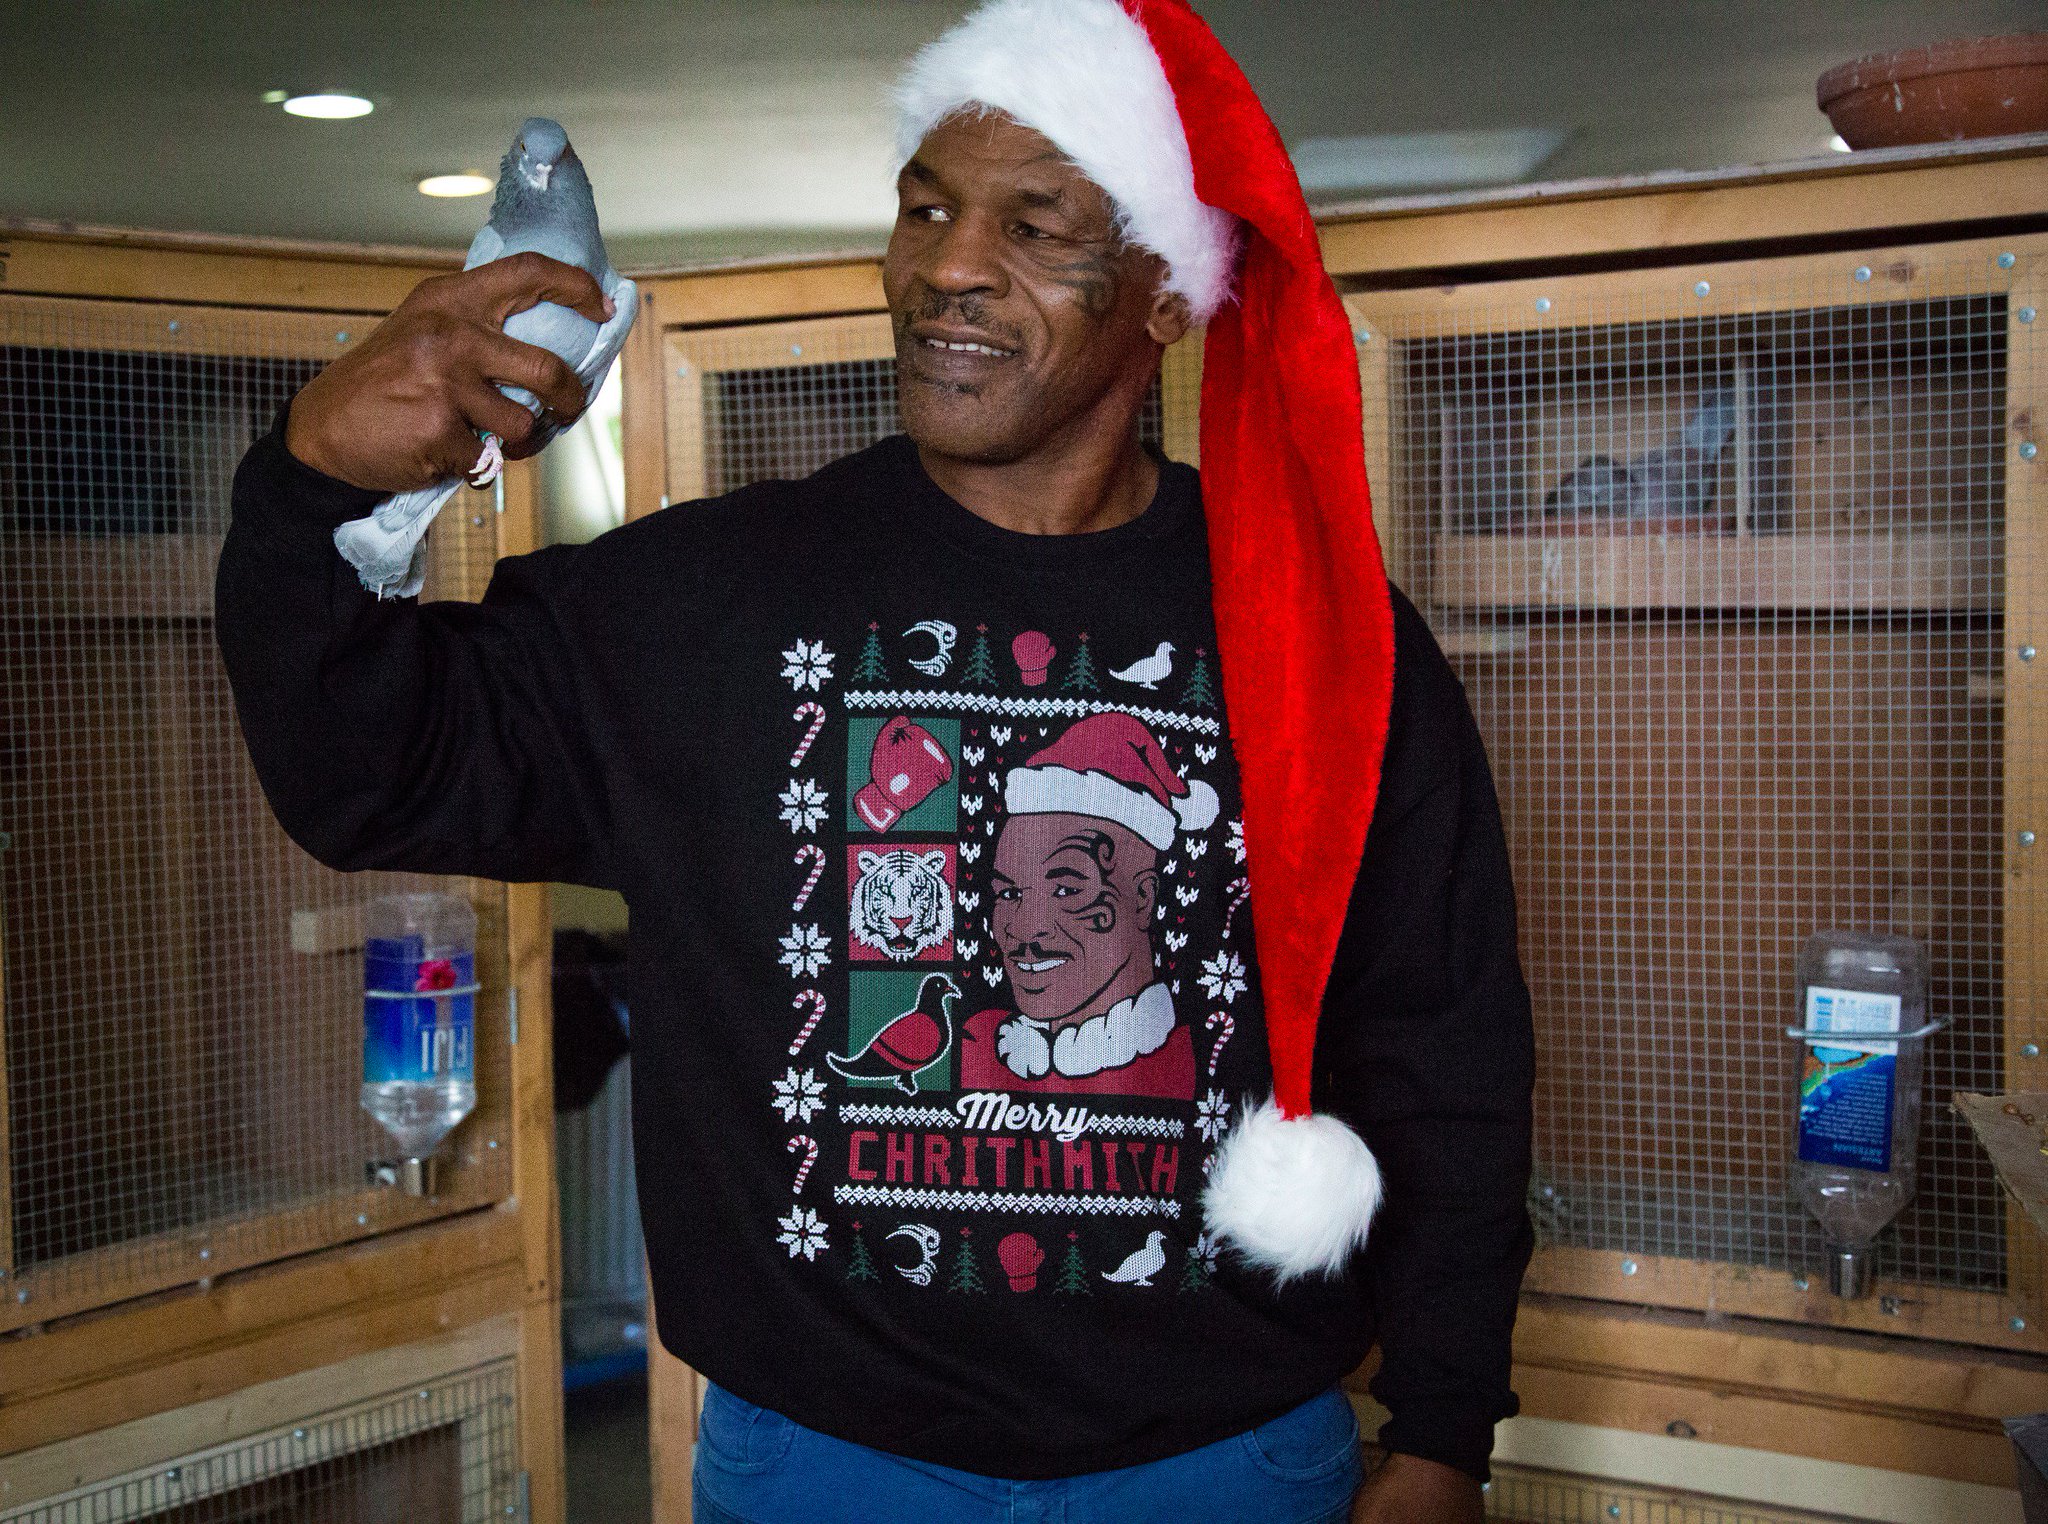 Mike Tyson would like to wish everyone a Merry Chrithmith! OT Lounge